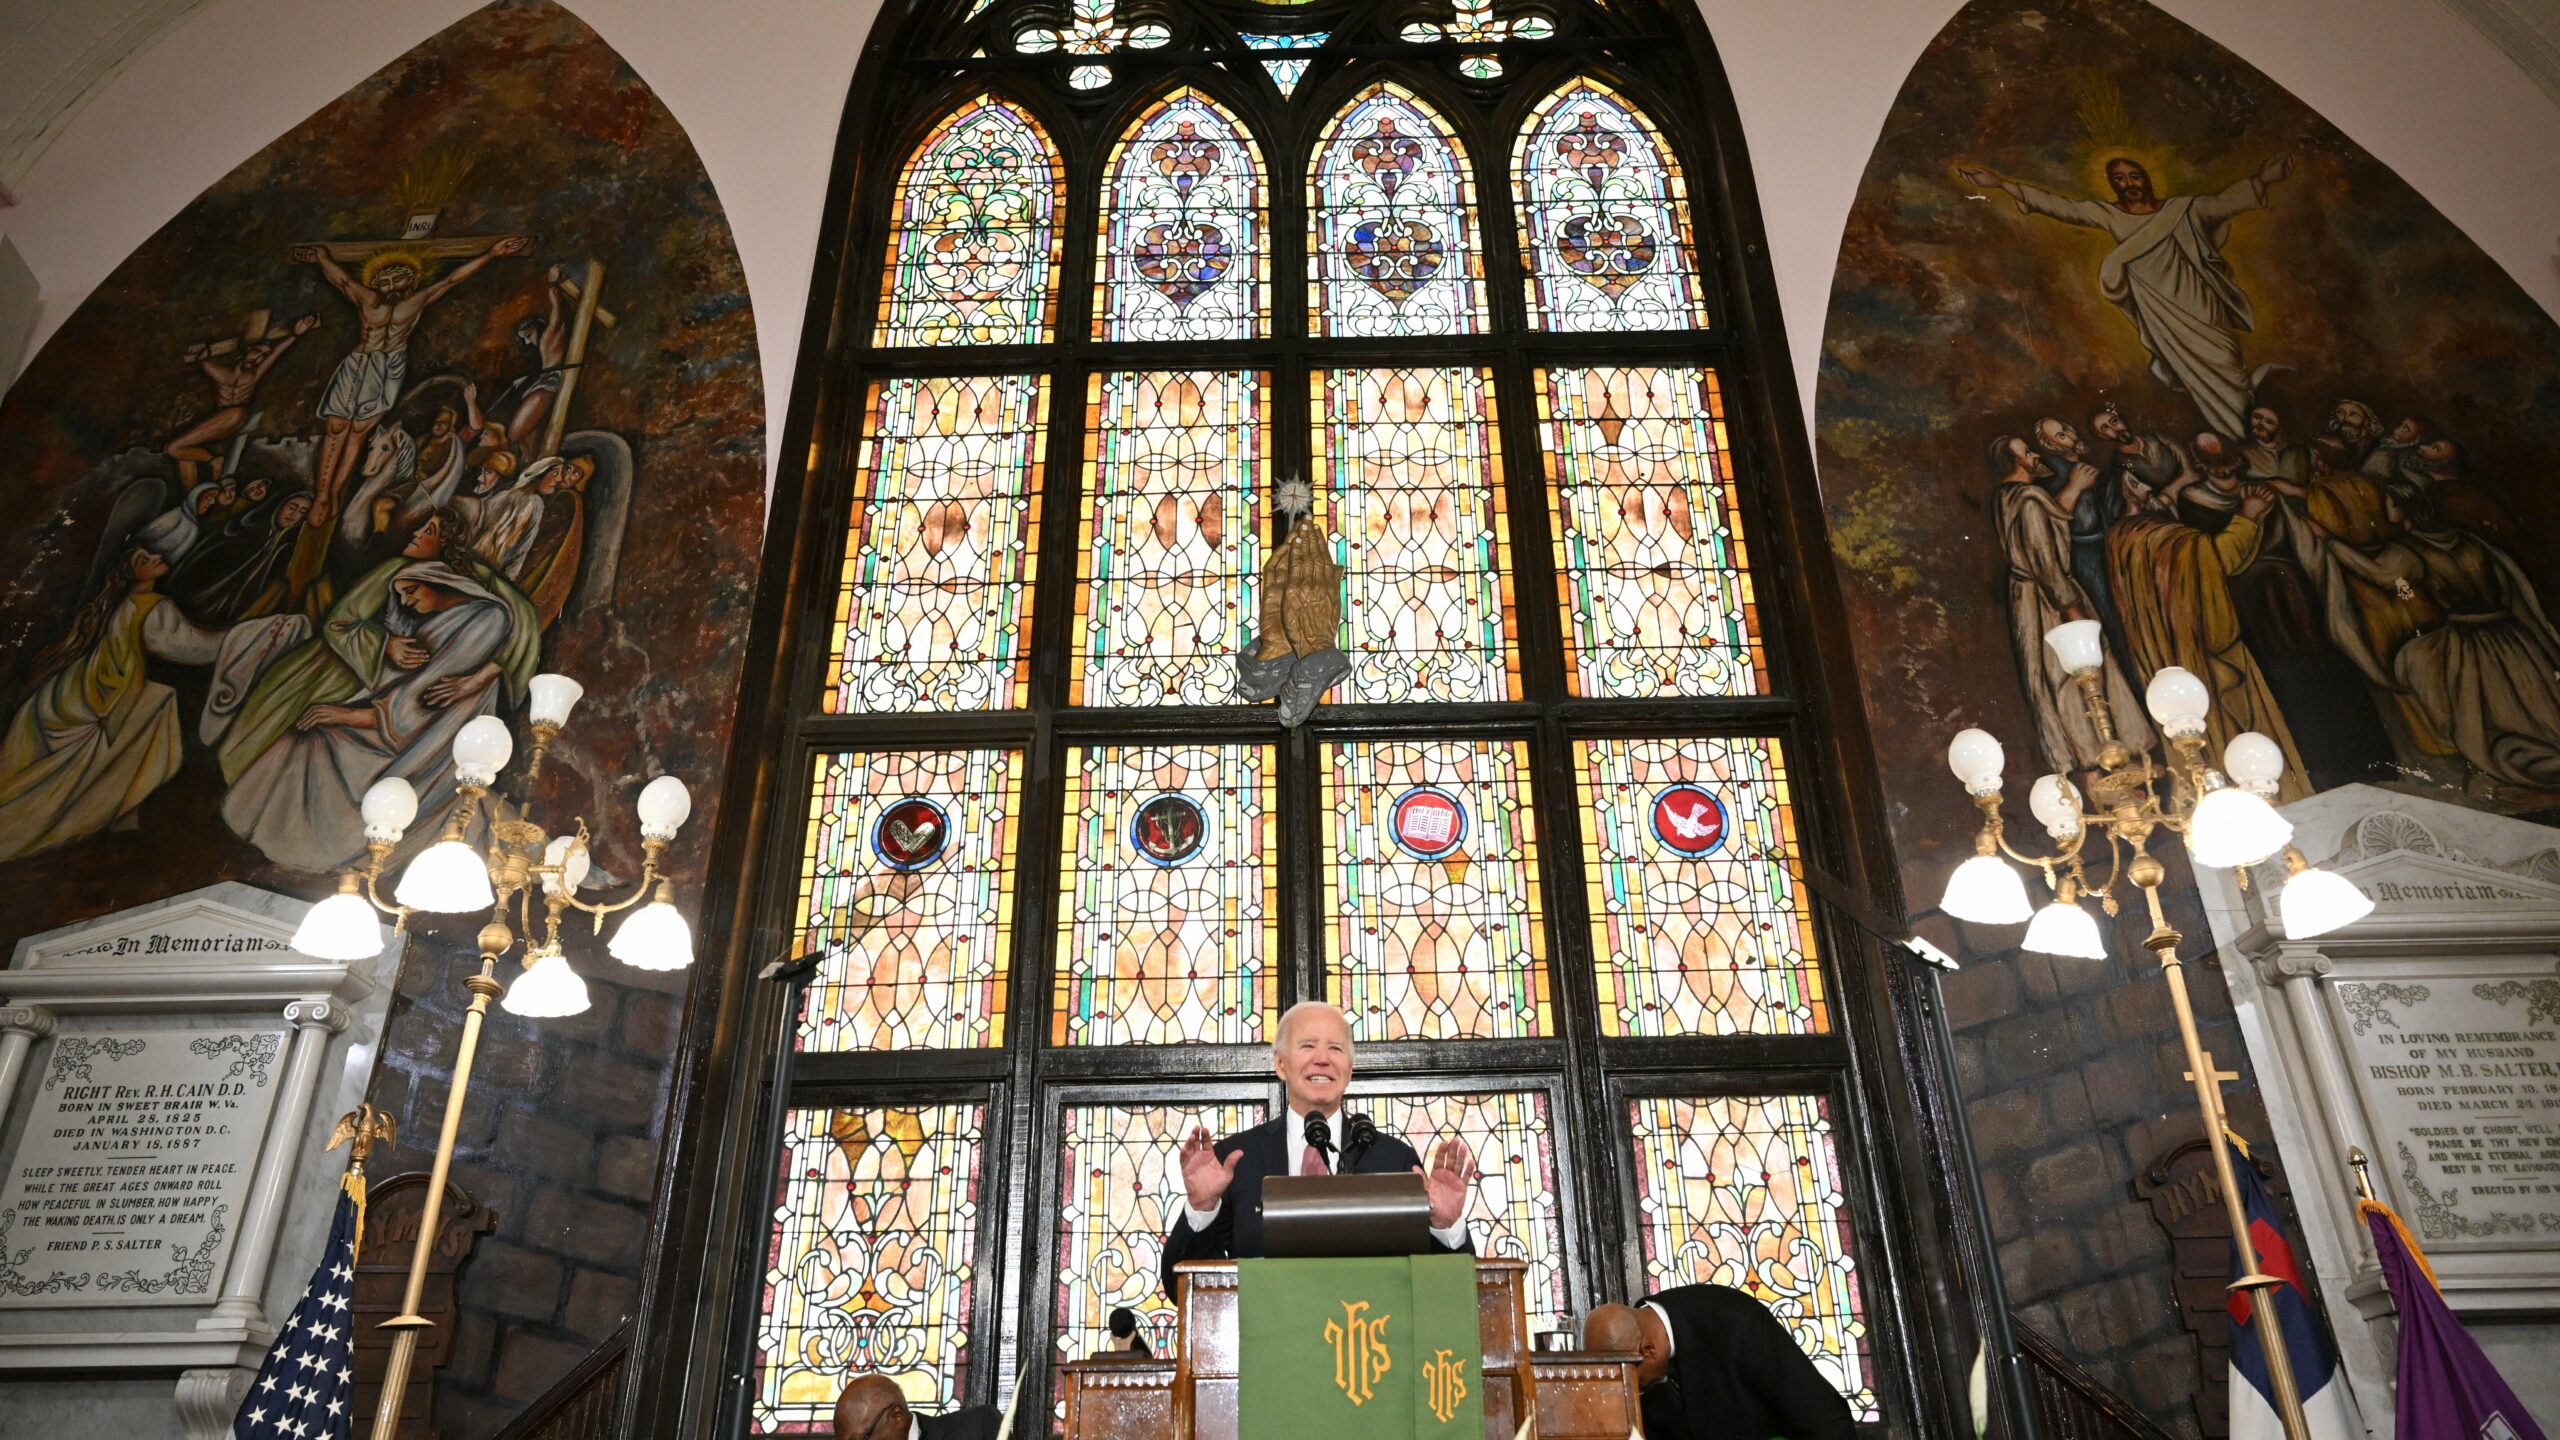 President Biden was giving a campaign speech at Mother Emanuel AME Church in Charleston, S.C., when protesters